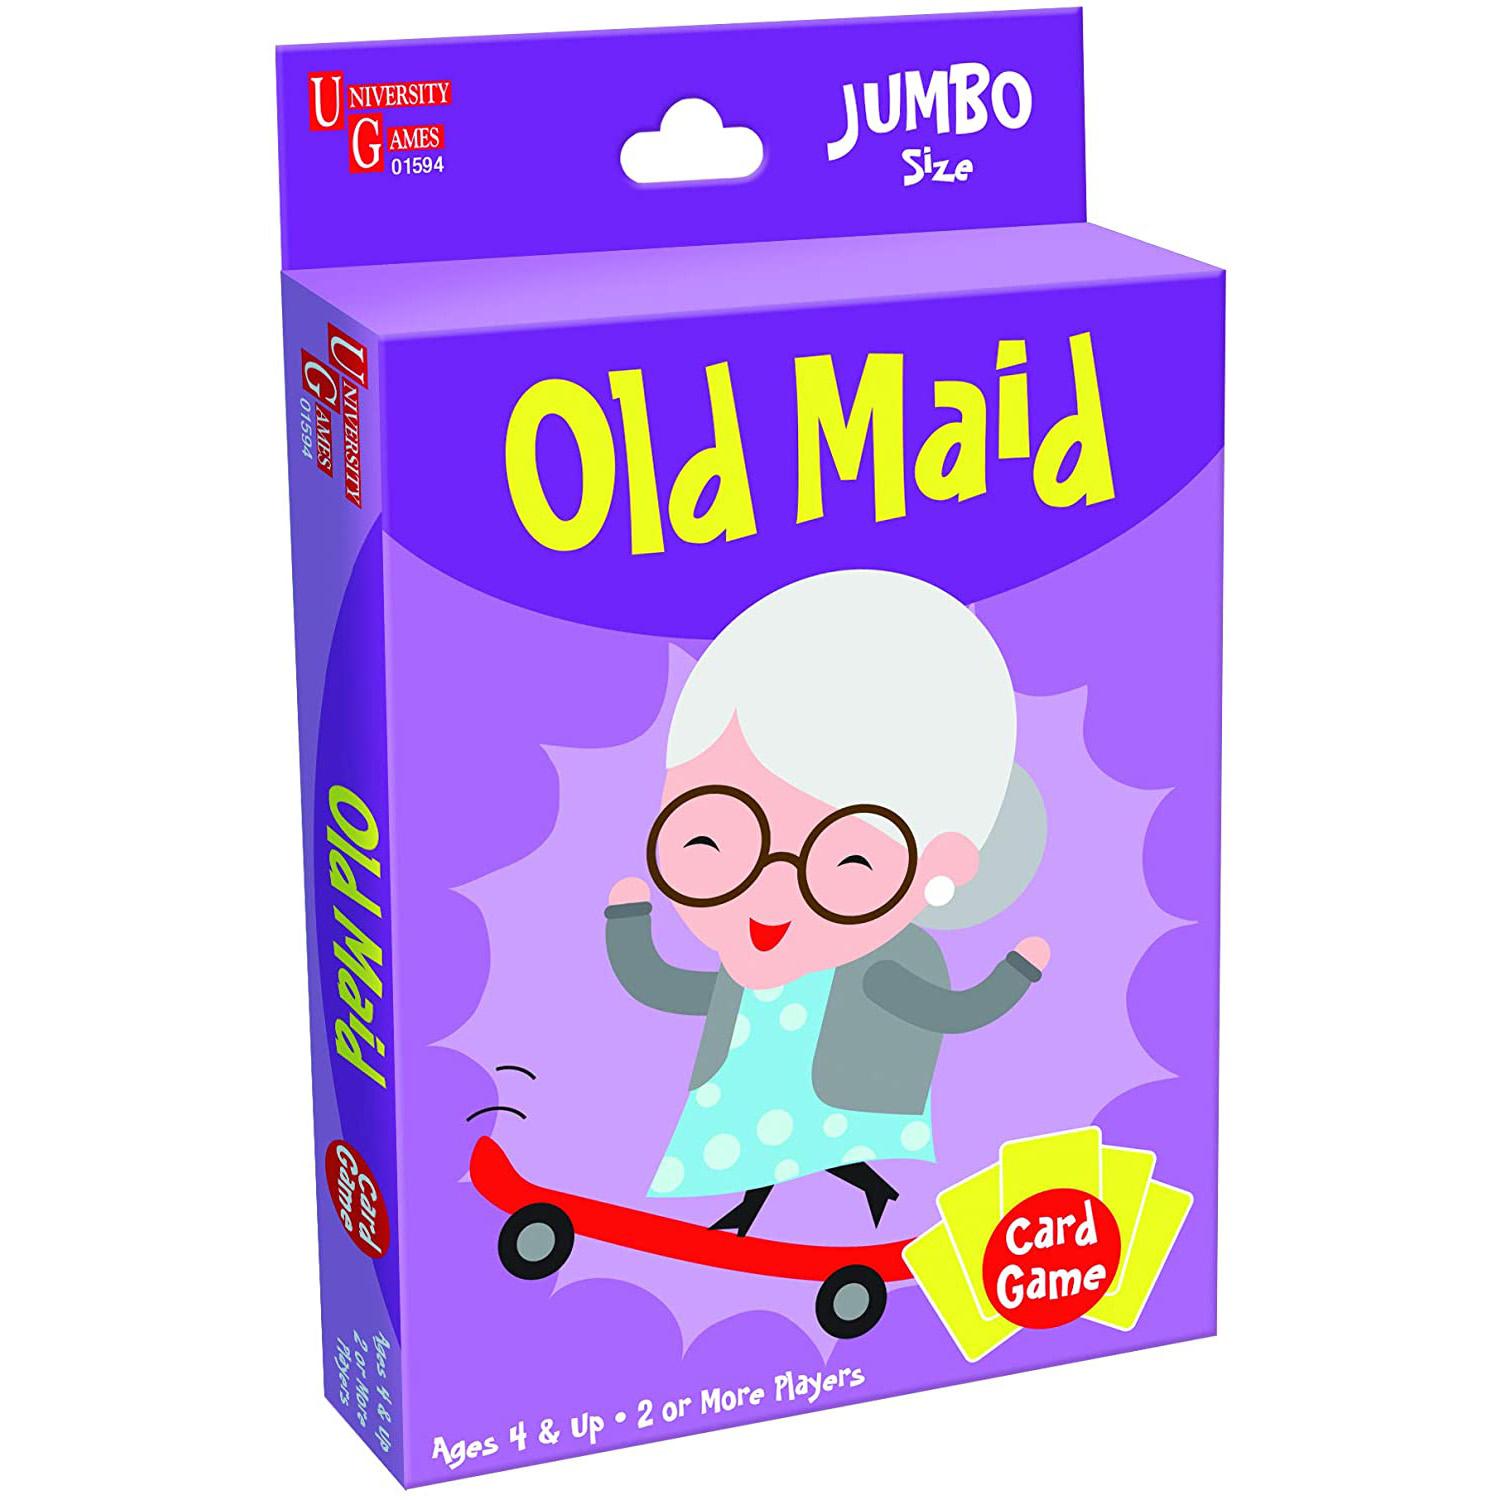 University Games Old Maid Card Game for $2.97